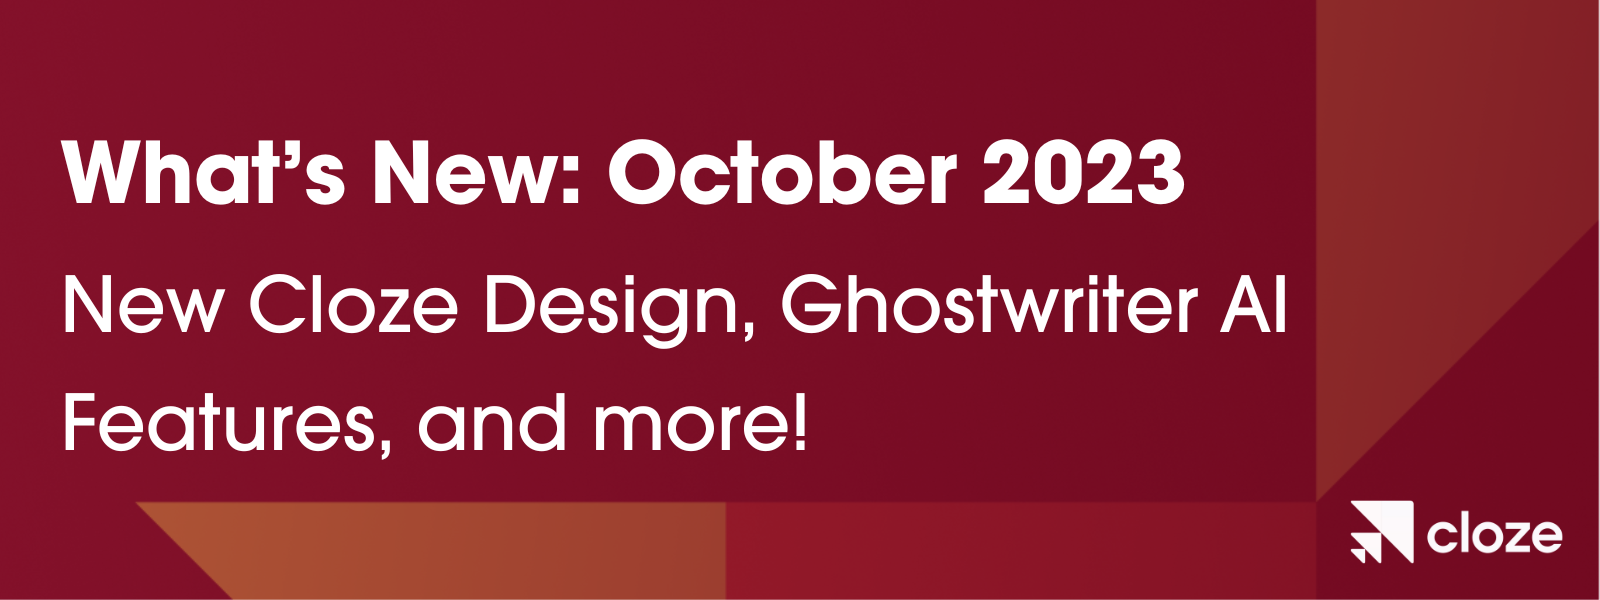 What's New in Cloze October 2023. 
New Cloze Design, More Ghostwriter AI Features, and Much More.